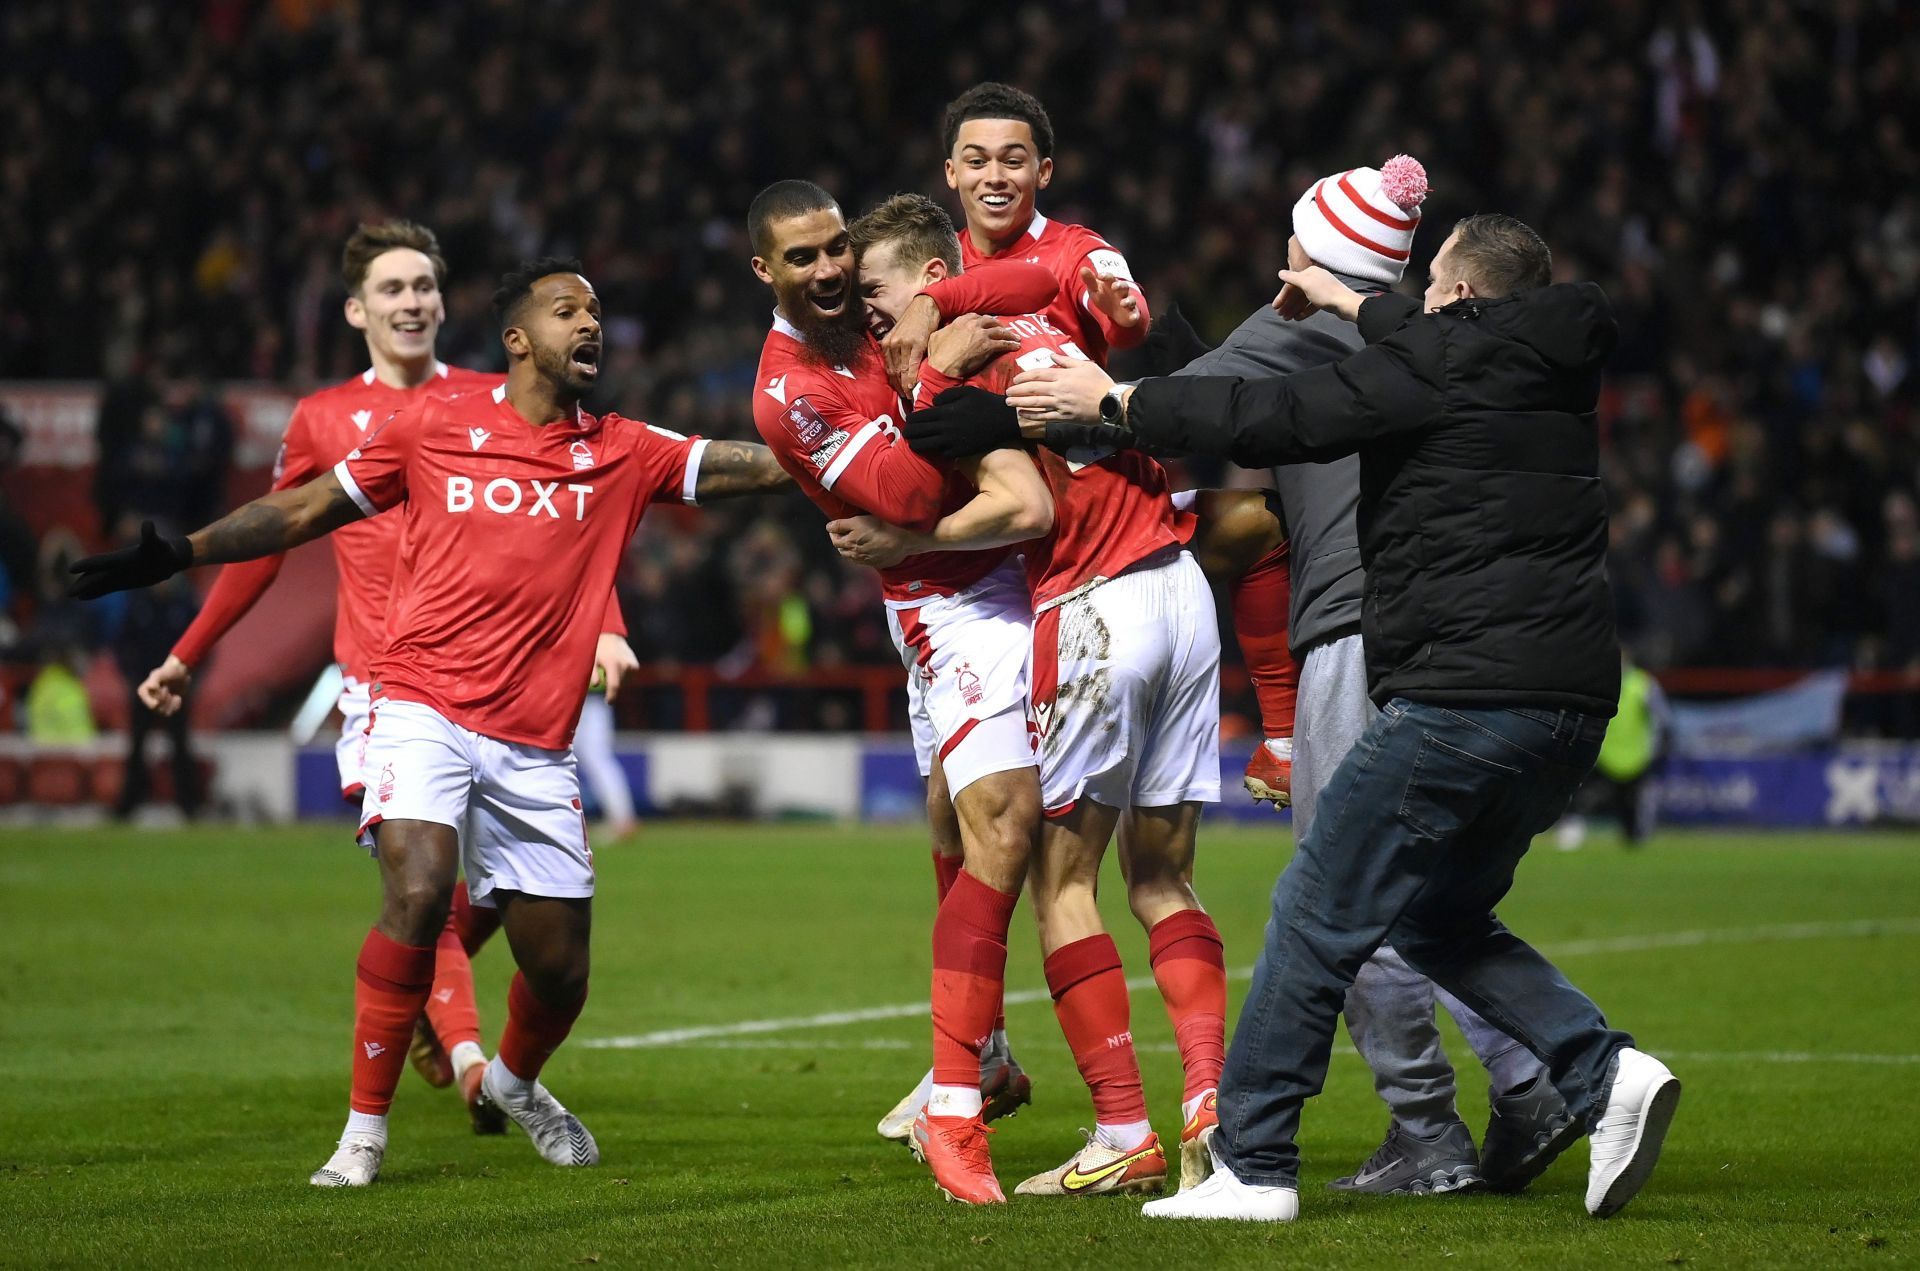 Nottingham Forest sent Arsenal packing in the third round of the FA Cup on Sunday